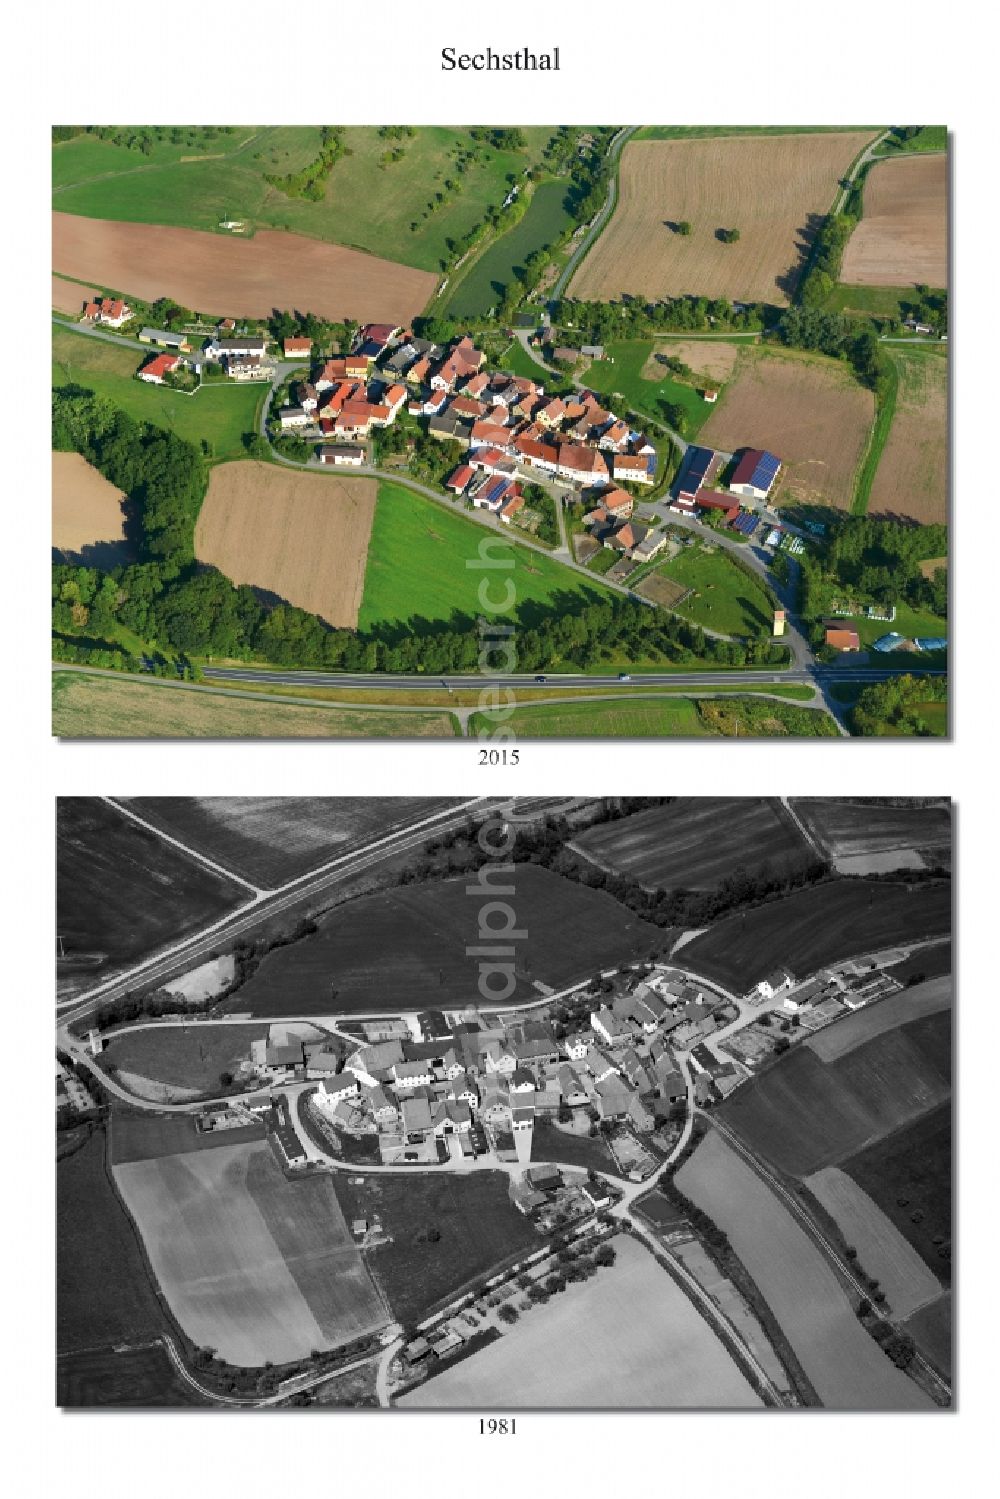 Aerial photograph Sechsthal - 1981 and 2015 village - view change of Sechsthal in the state Bavaria